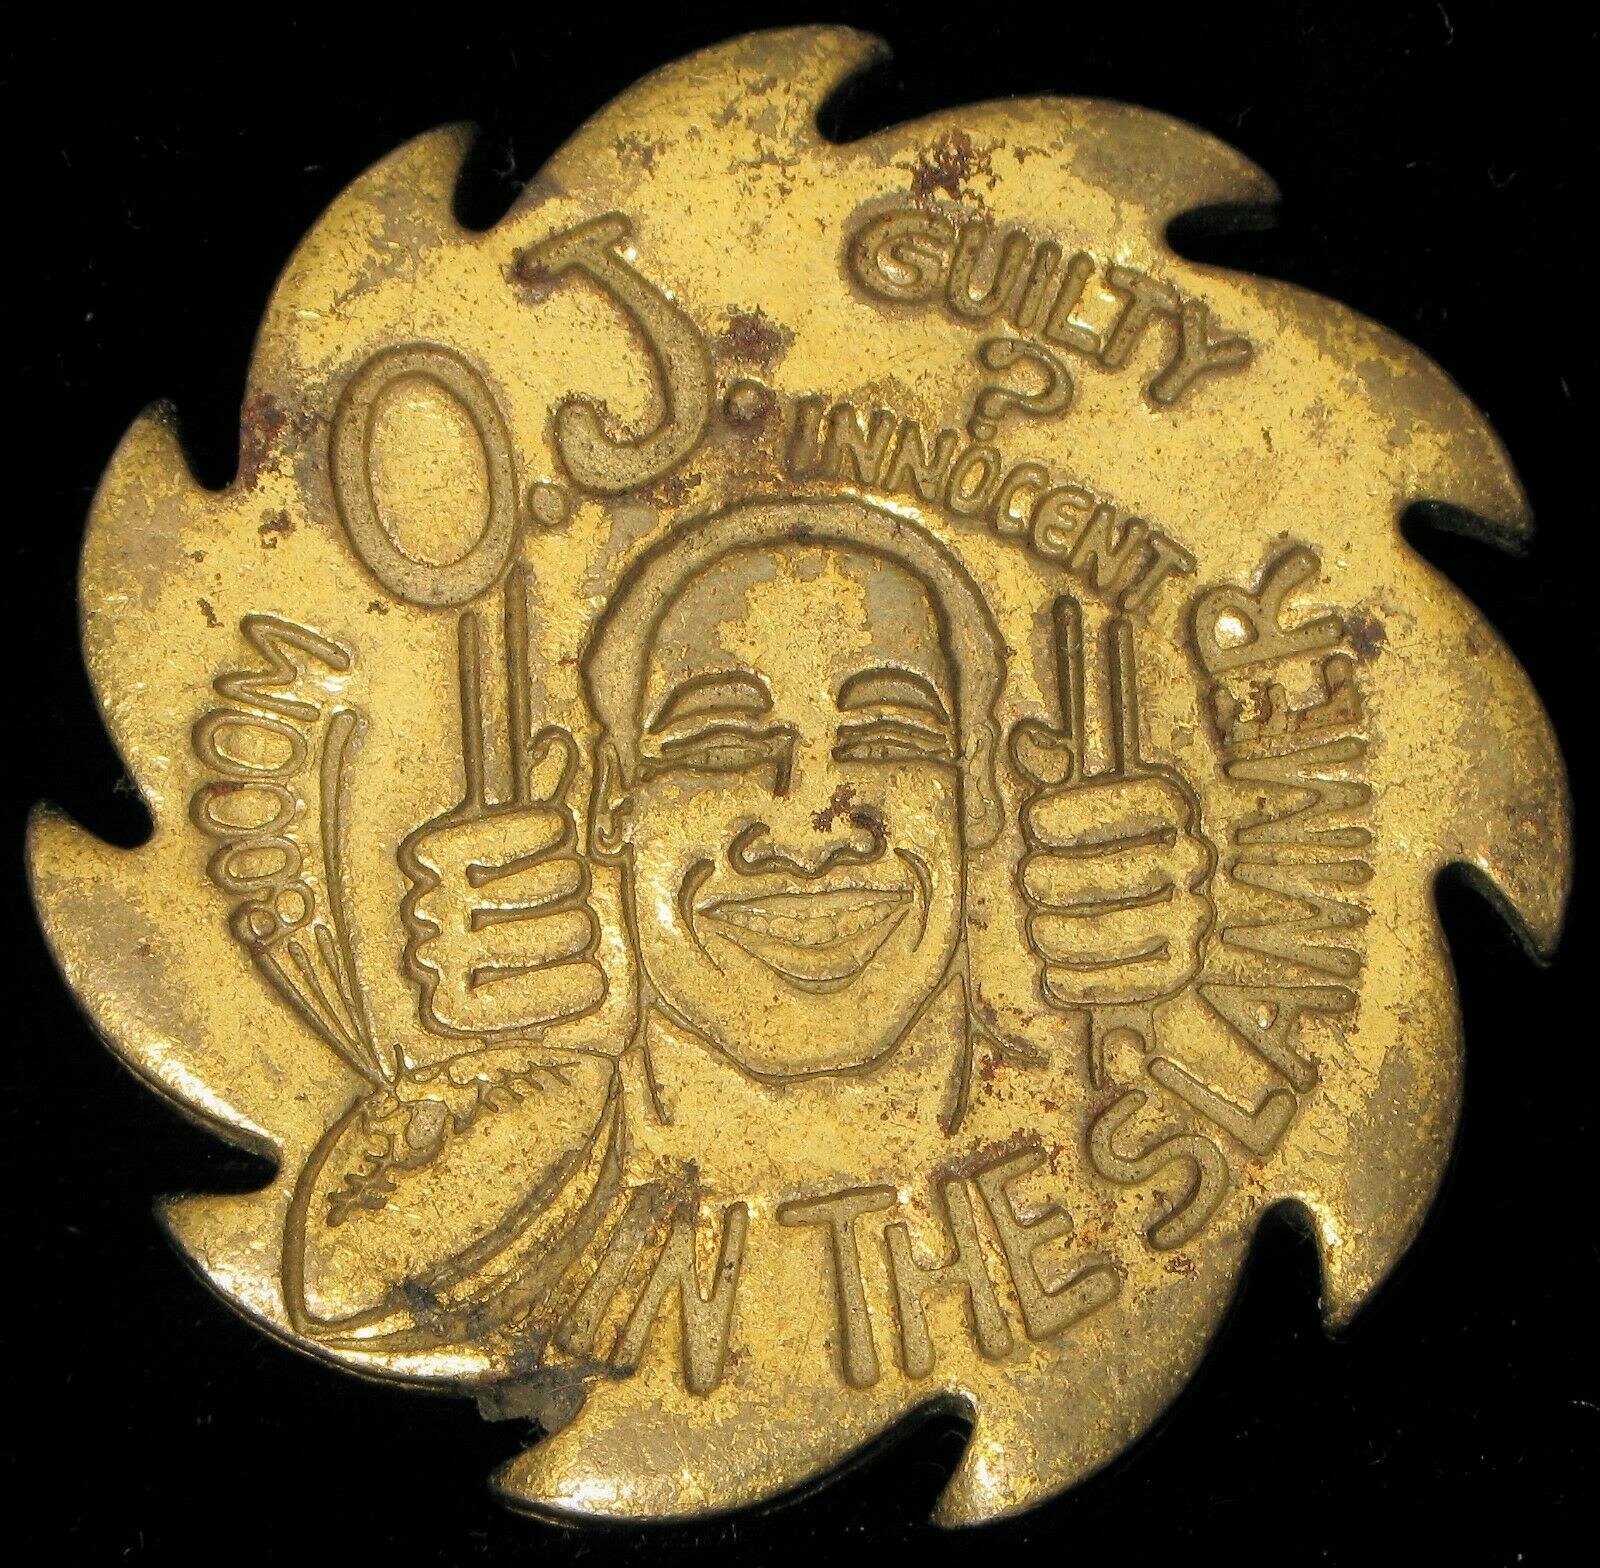 Gold slammer with etching of O.J. on it